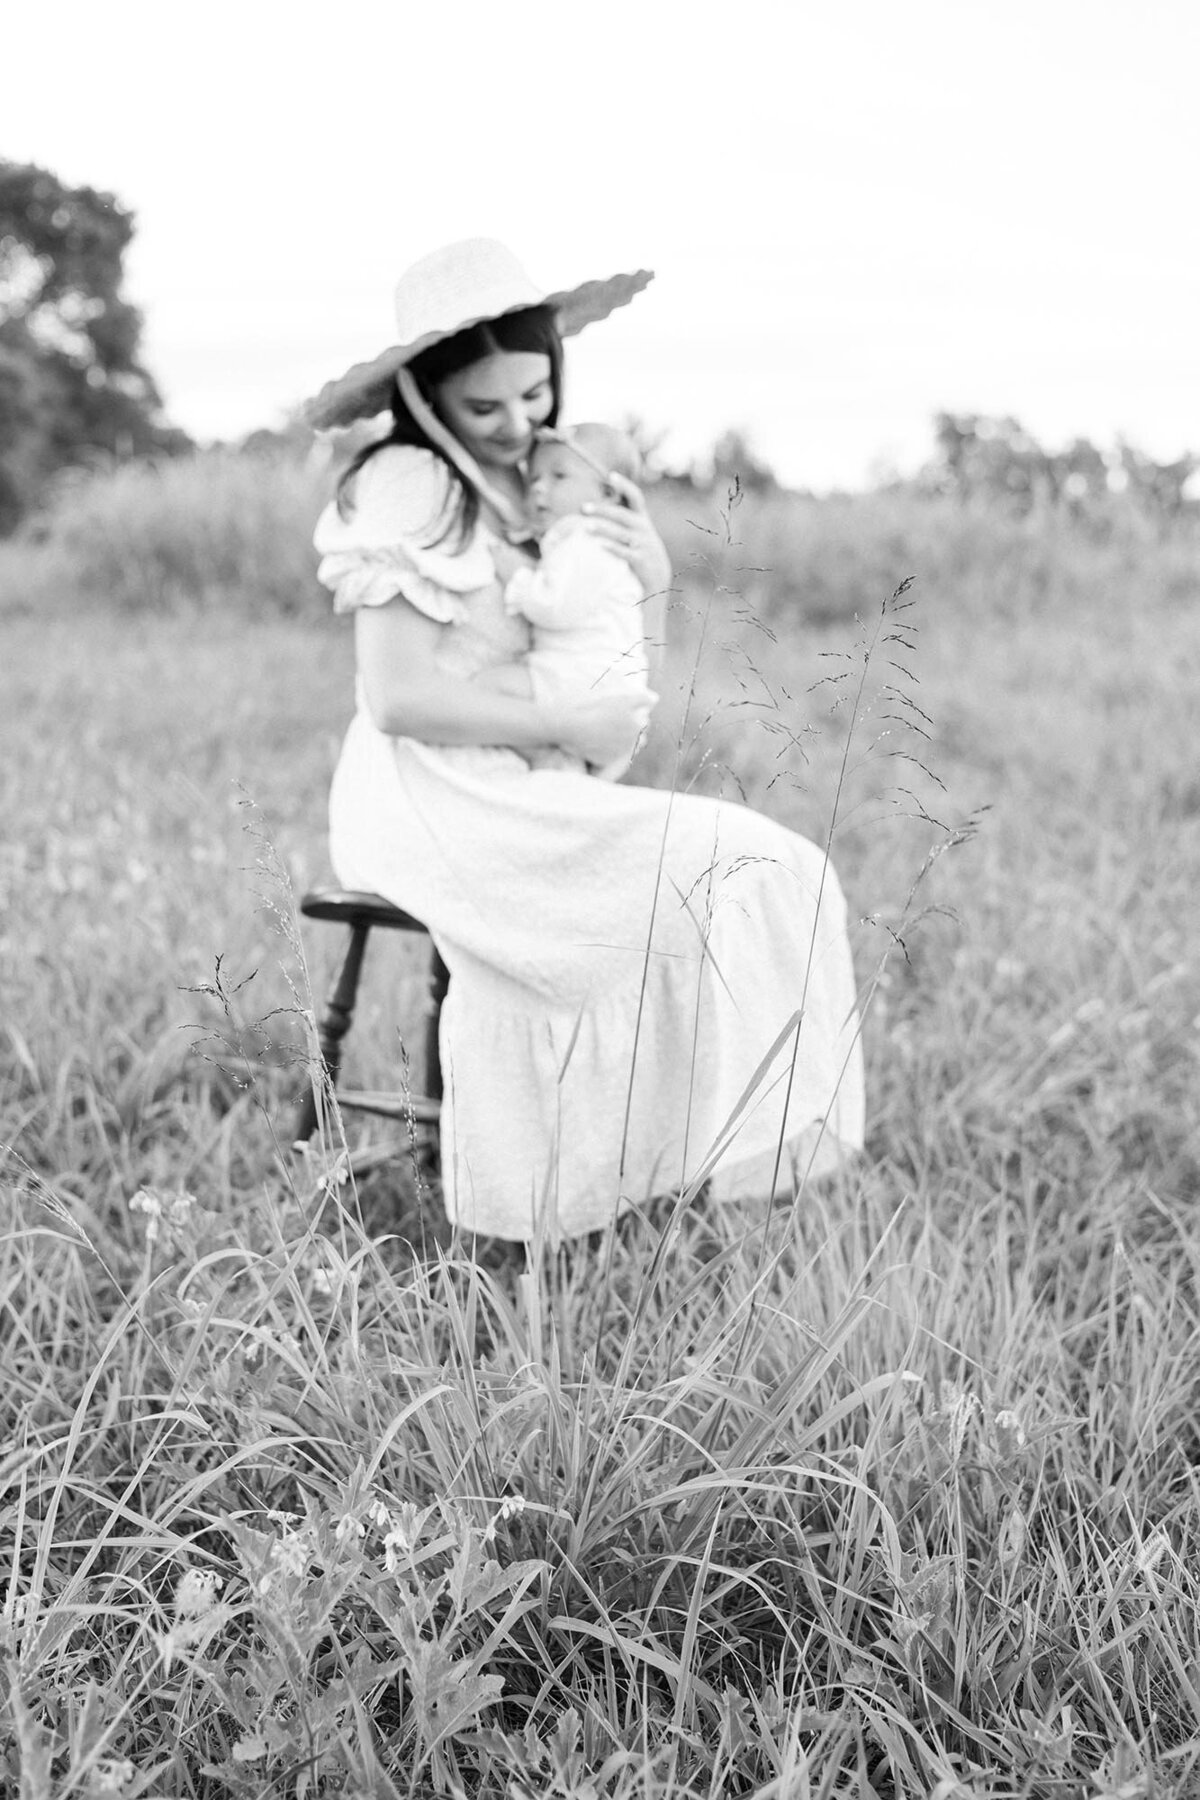 Black and White Virginia BEach Newborn Photography Portrait of a Mother snuggling her newborn close sitting on a stool in a grassy field  by Mary Eleanor